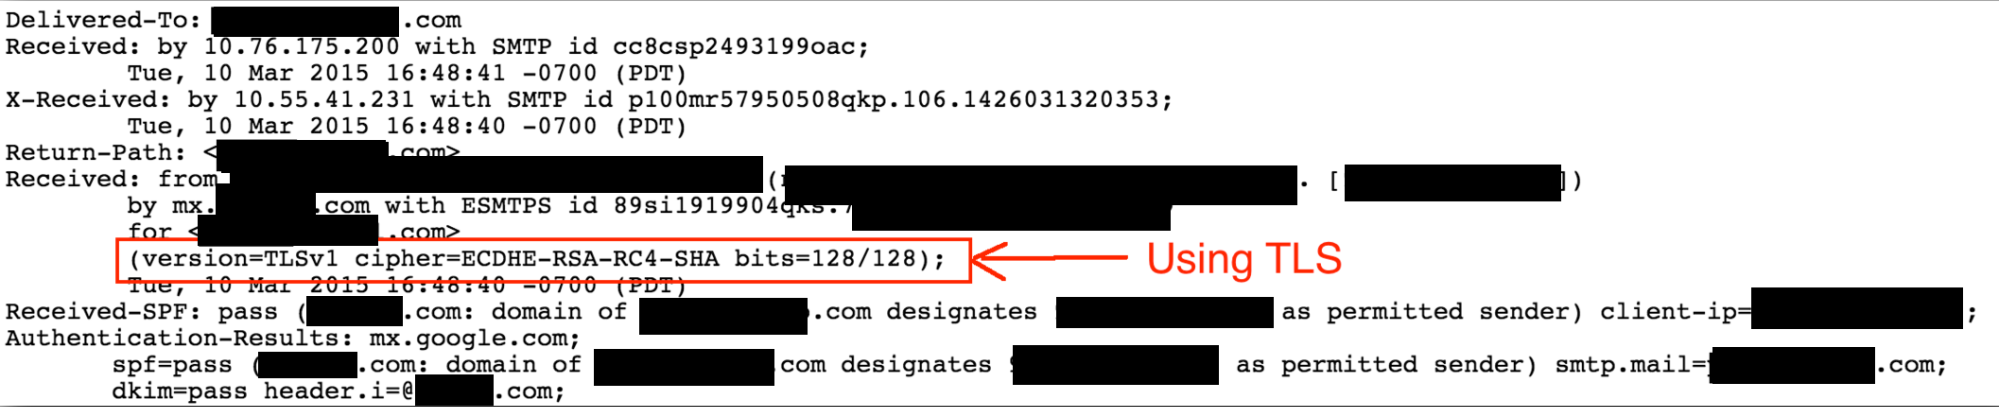 A sample email header showing that TLS was used